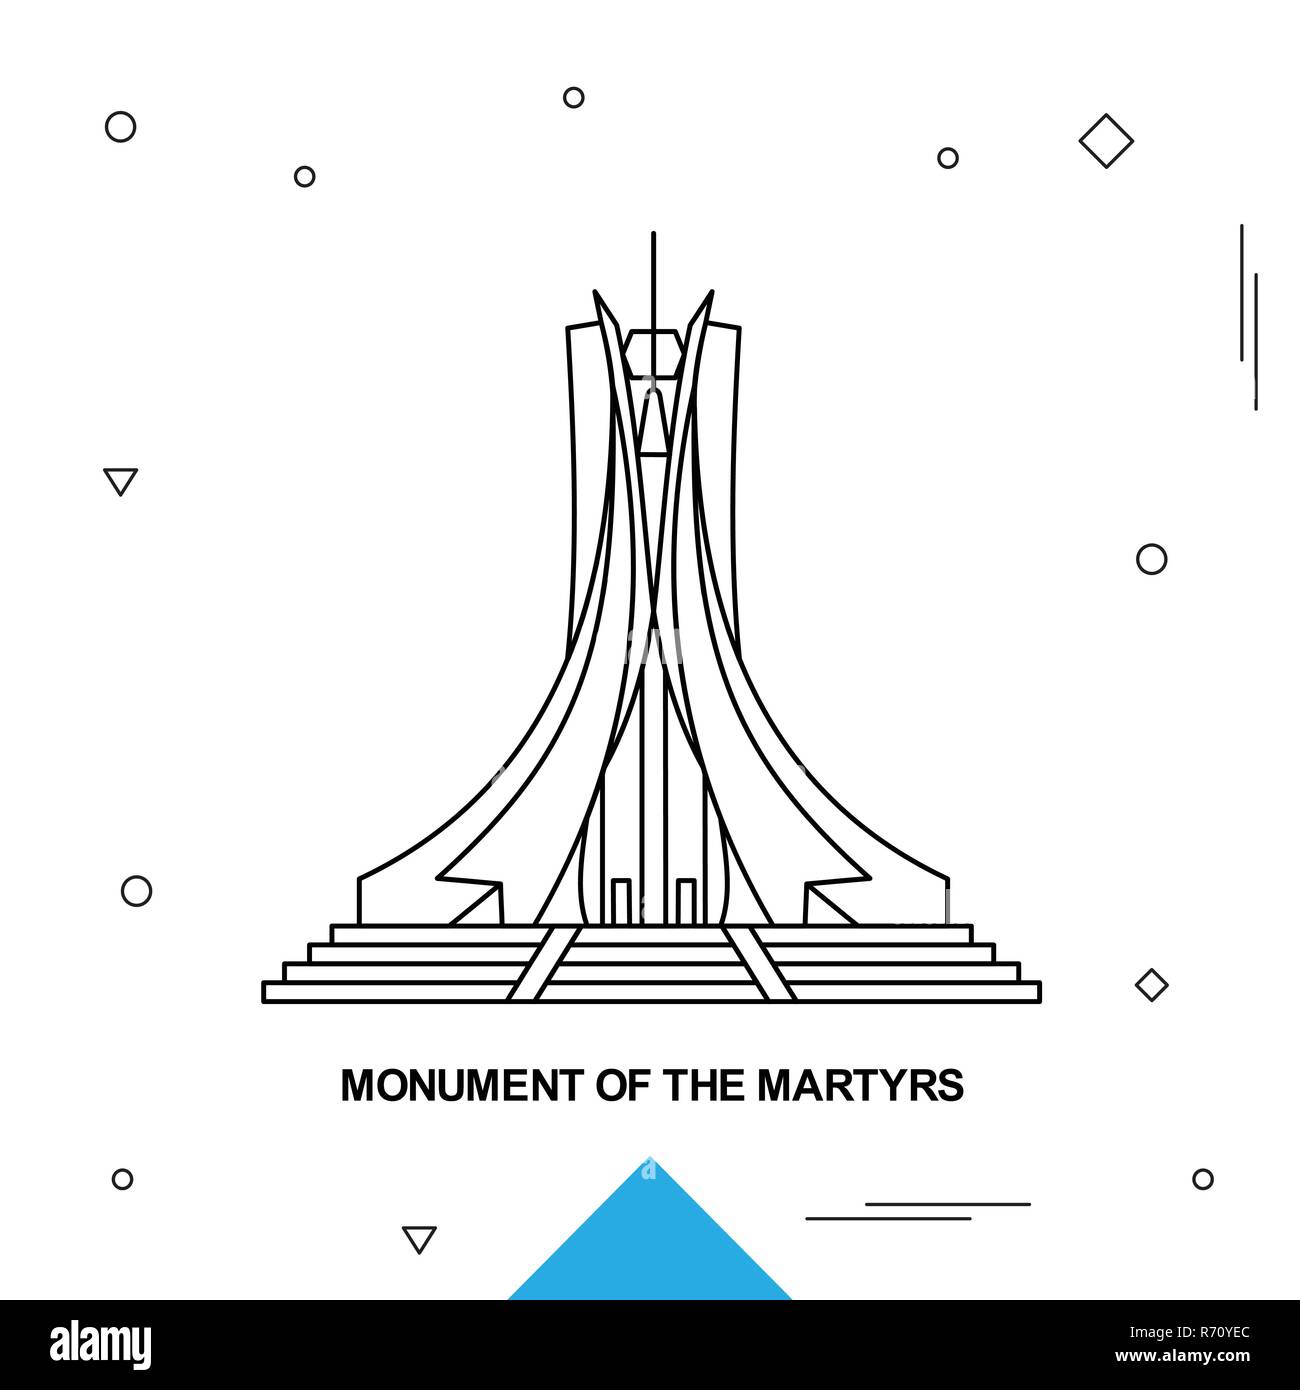 MONUMENT OF THE MARTYRS Stock Vector